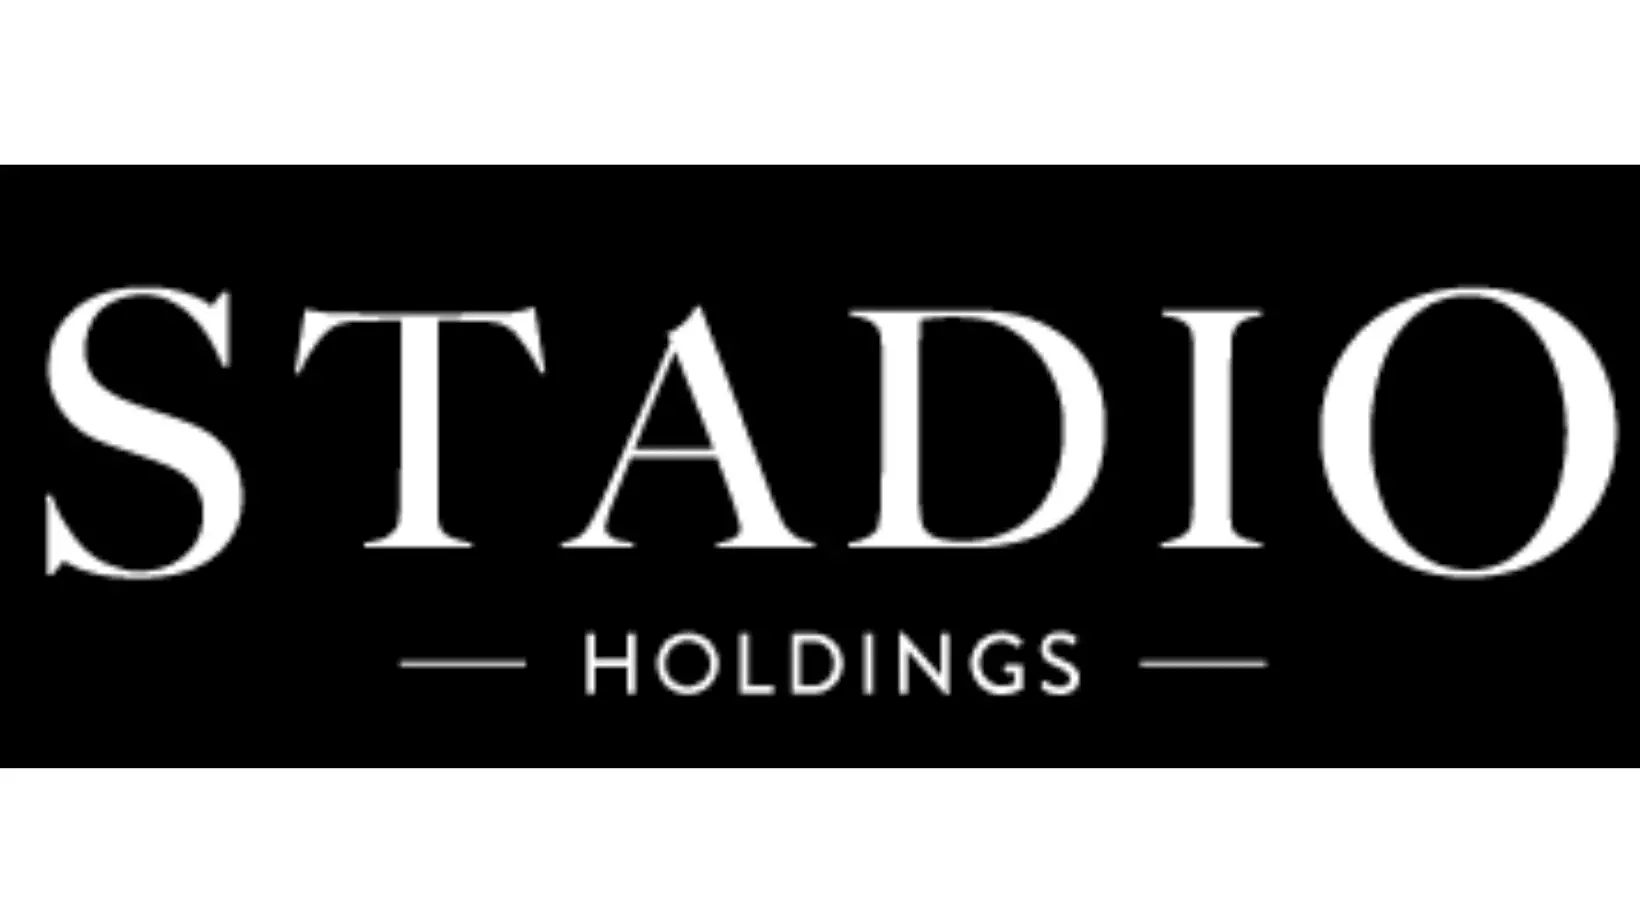 Stadion Holdings Limited Makes and Investment